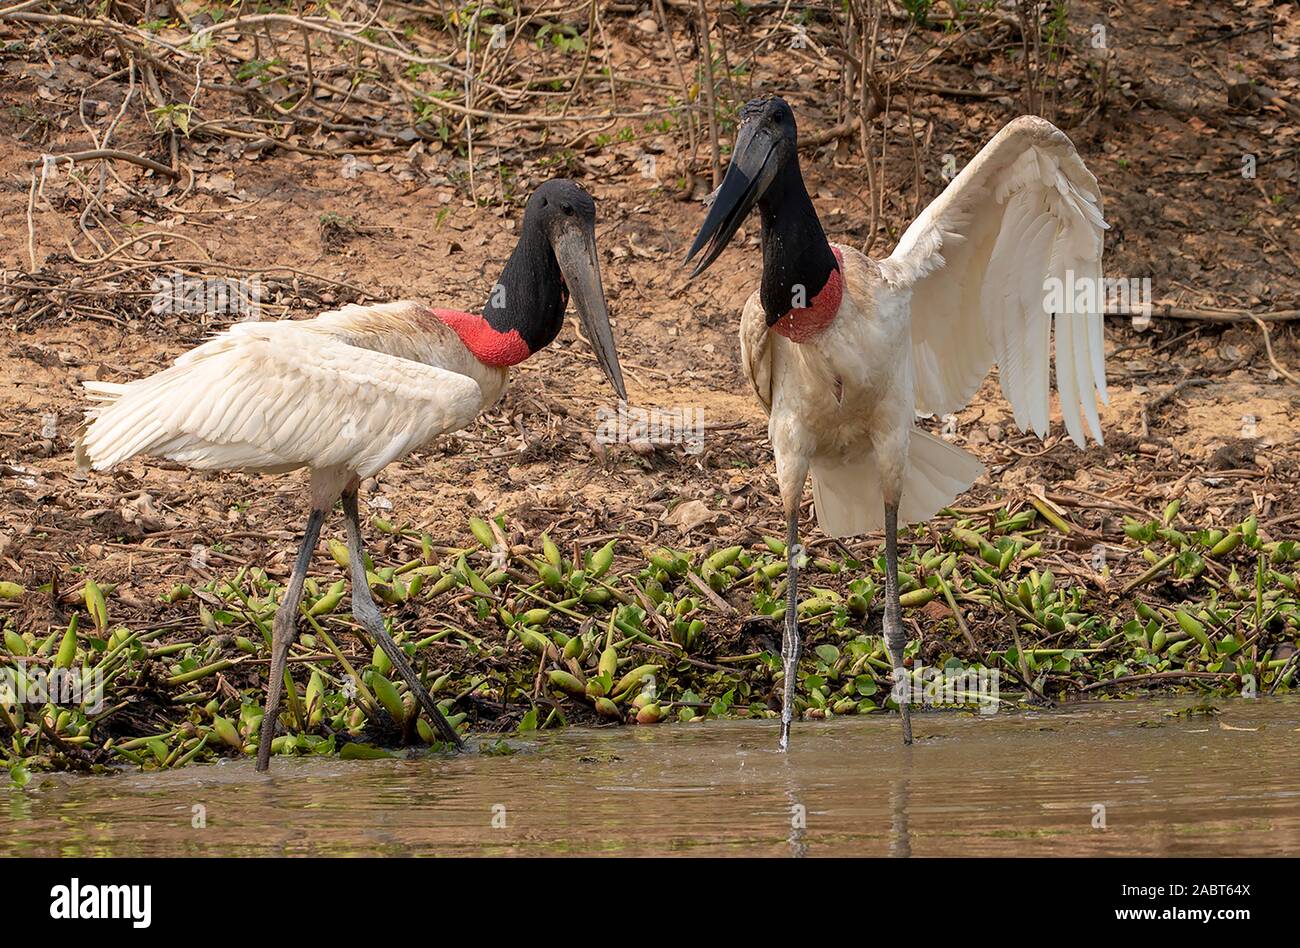 Largest stork in the Pantanal, Brazil Stock Photo